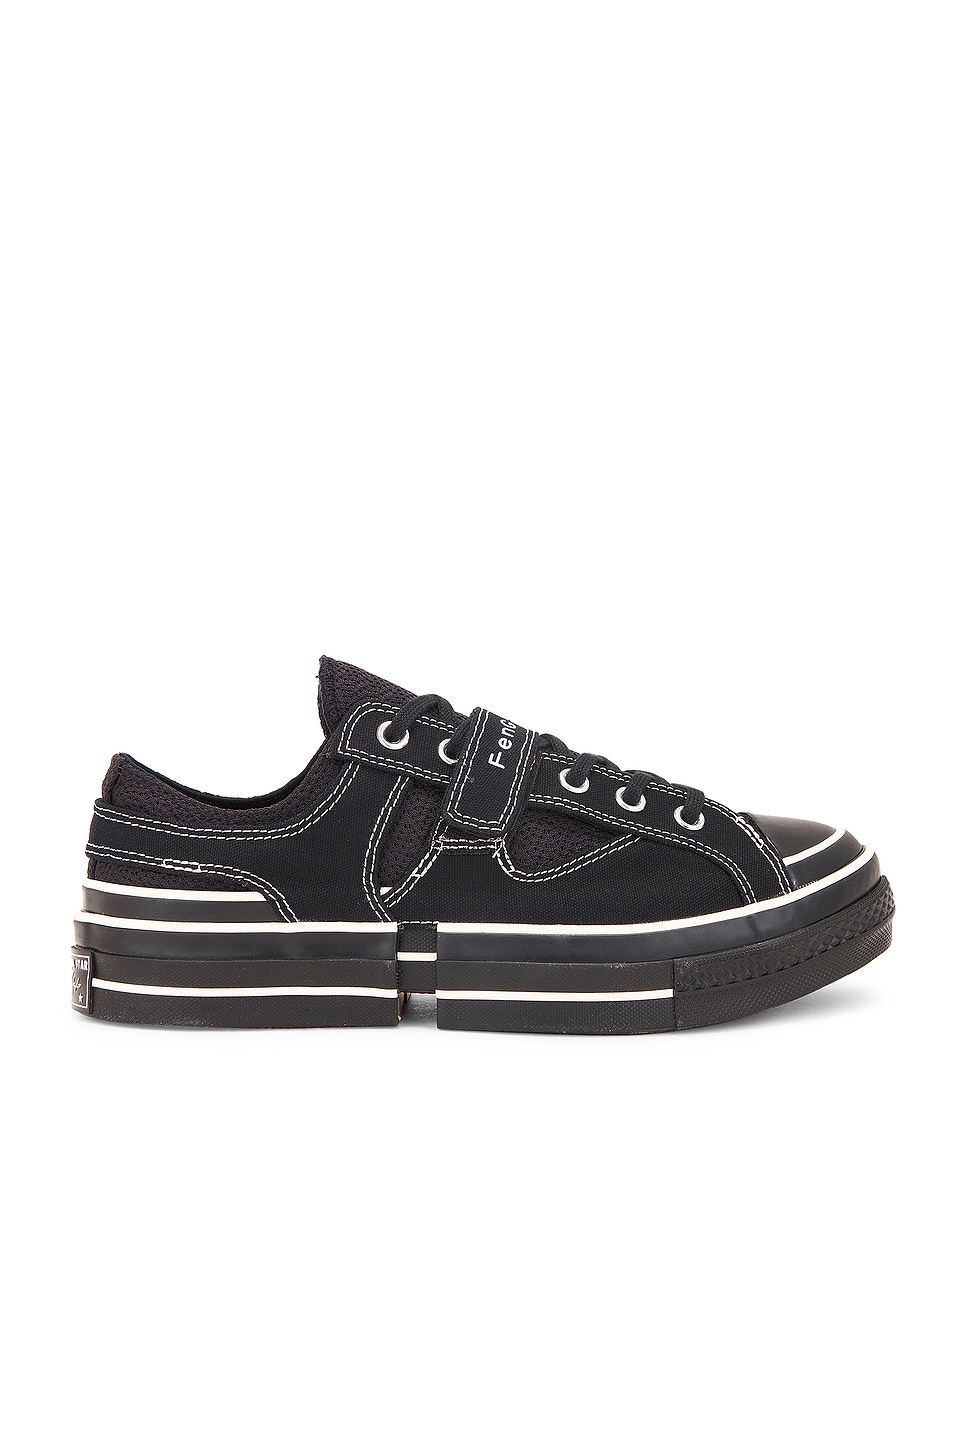 Image 1 of Converse x Feng Chen Wang Ct70 2 In 1 Ox in Black & Egret